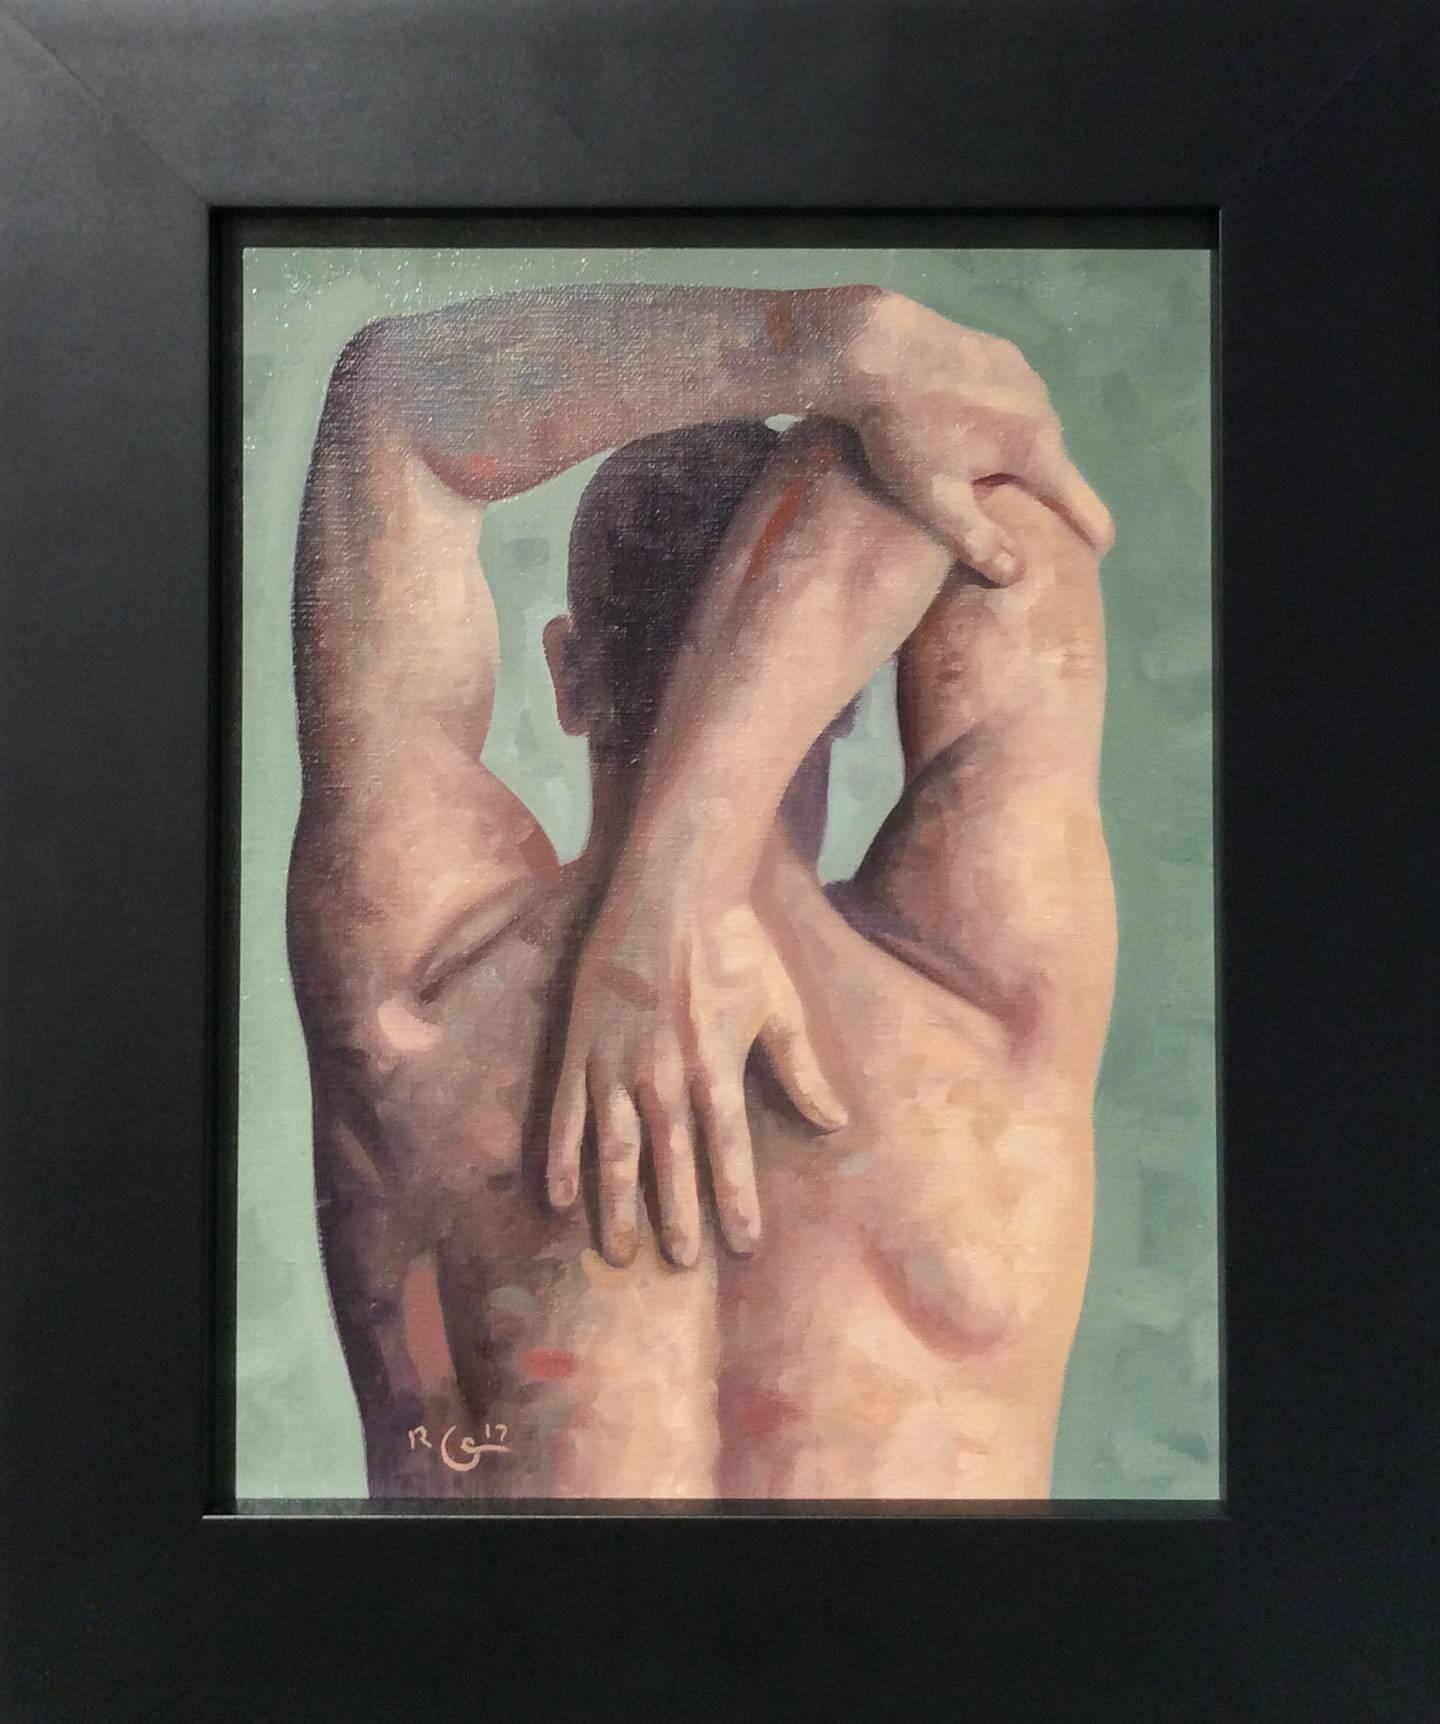 Robert Goldstrom Figurative Painting - Anatomy Study 4 (Modern Figurative Oil Painting, Back of Male Nude in Frame)